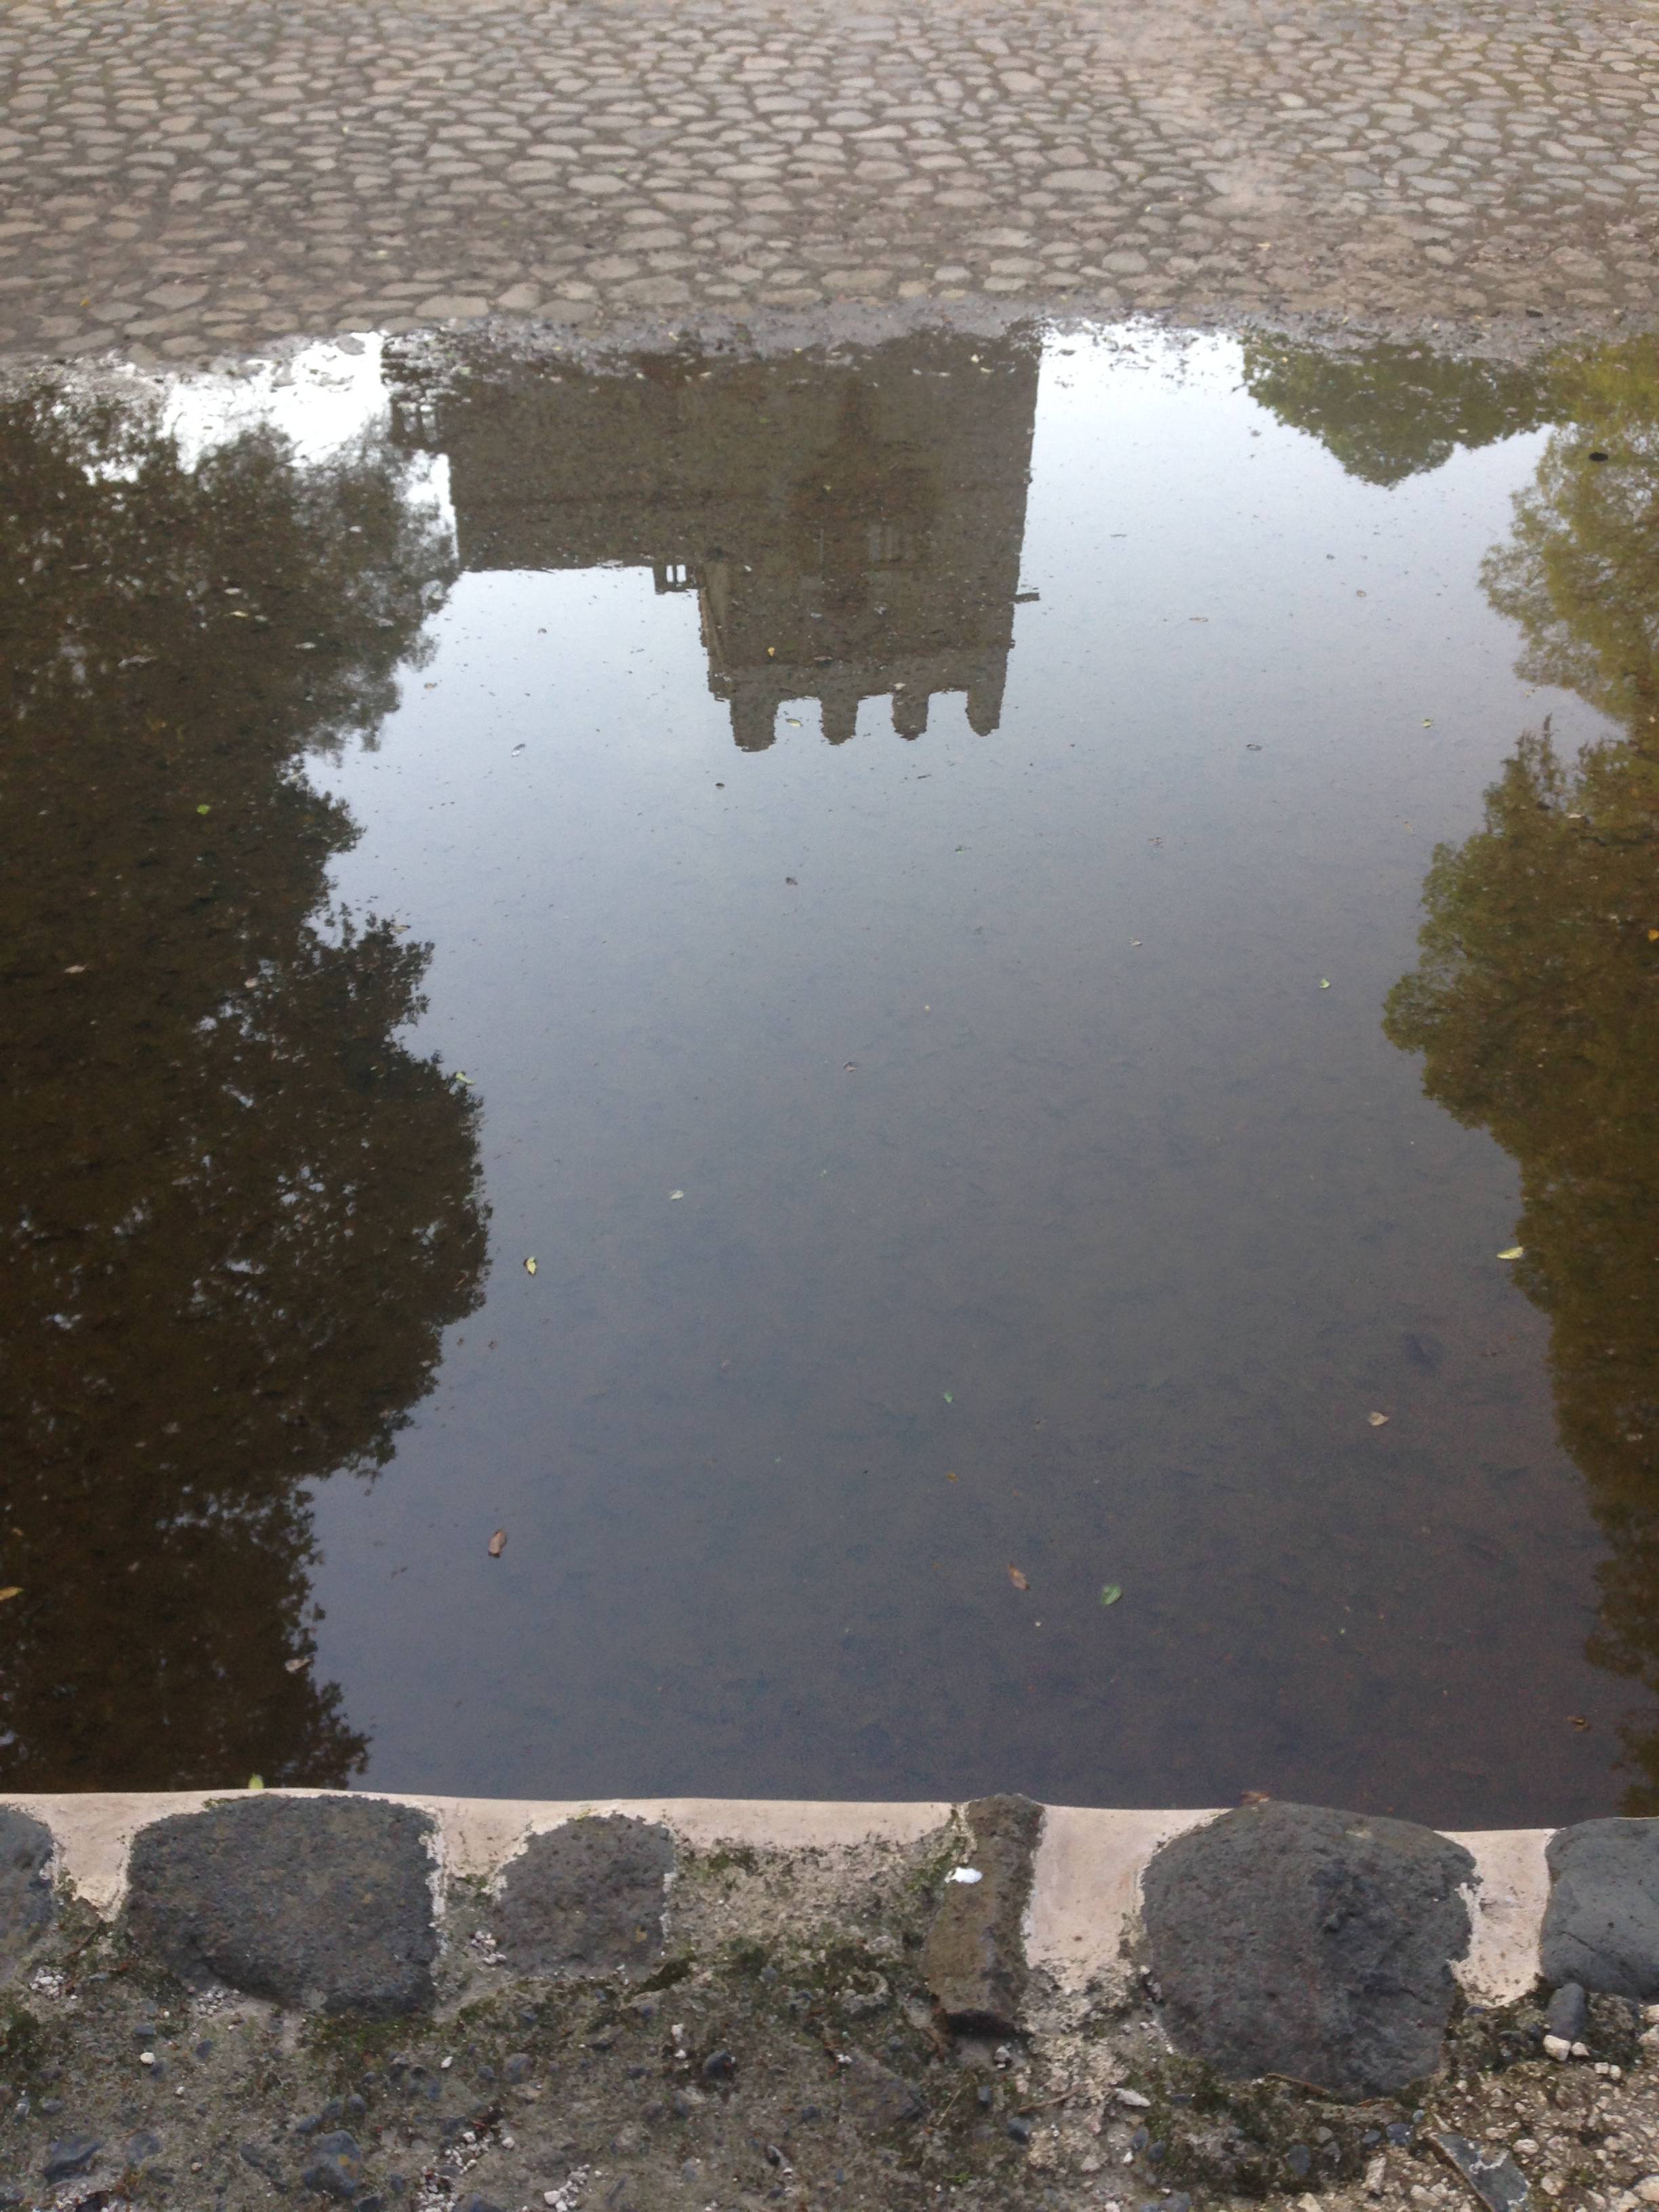 Reflection in the water of Haile Selassie's private family pool